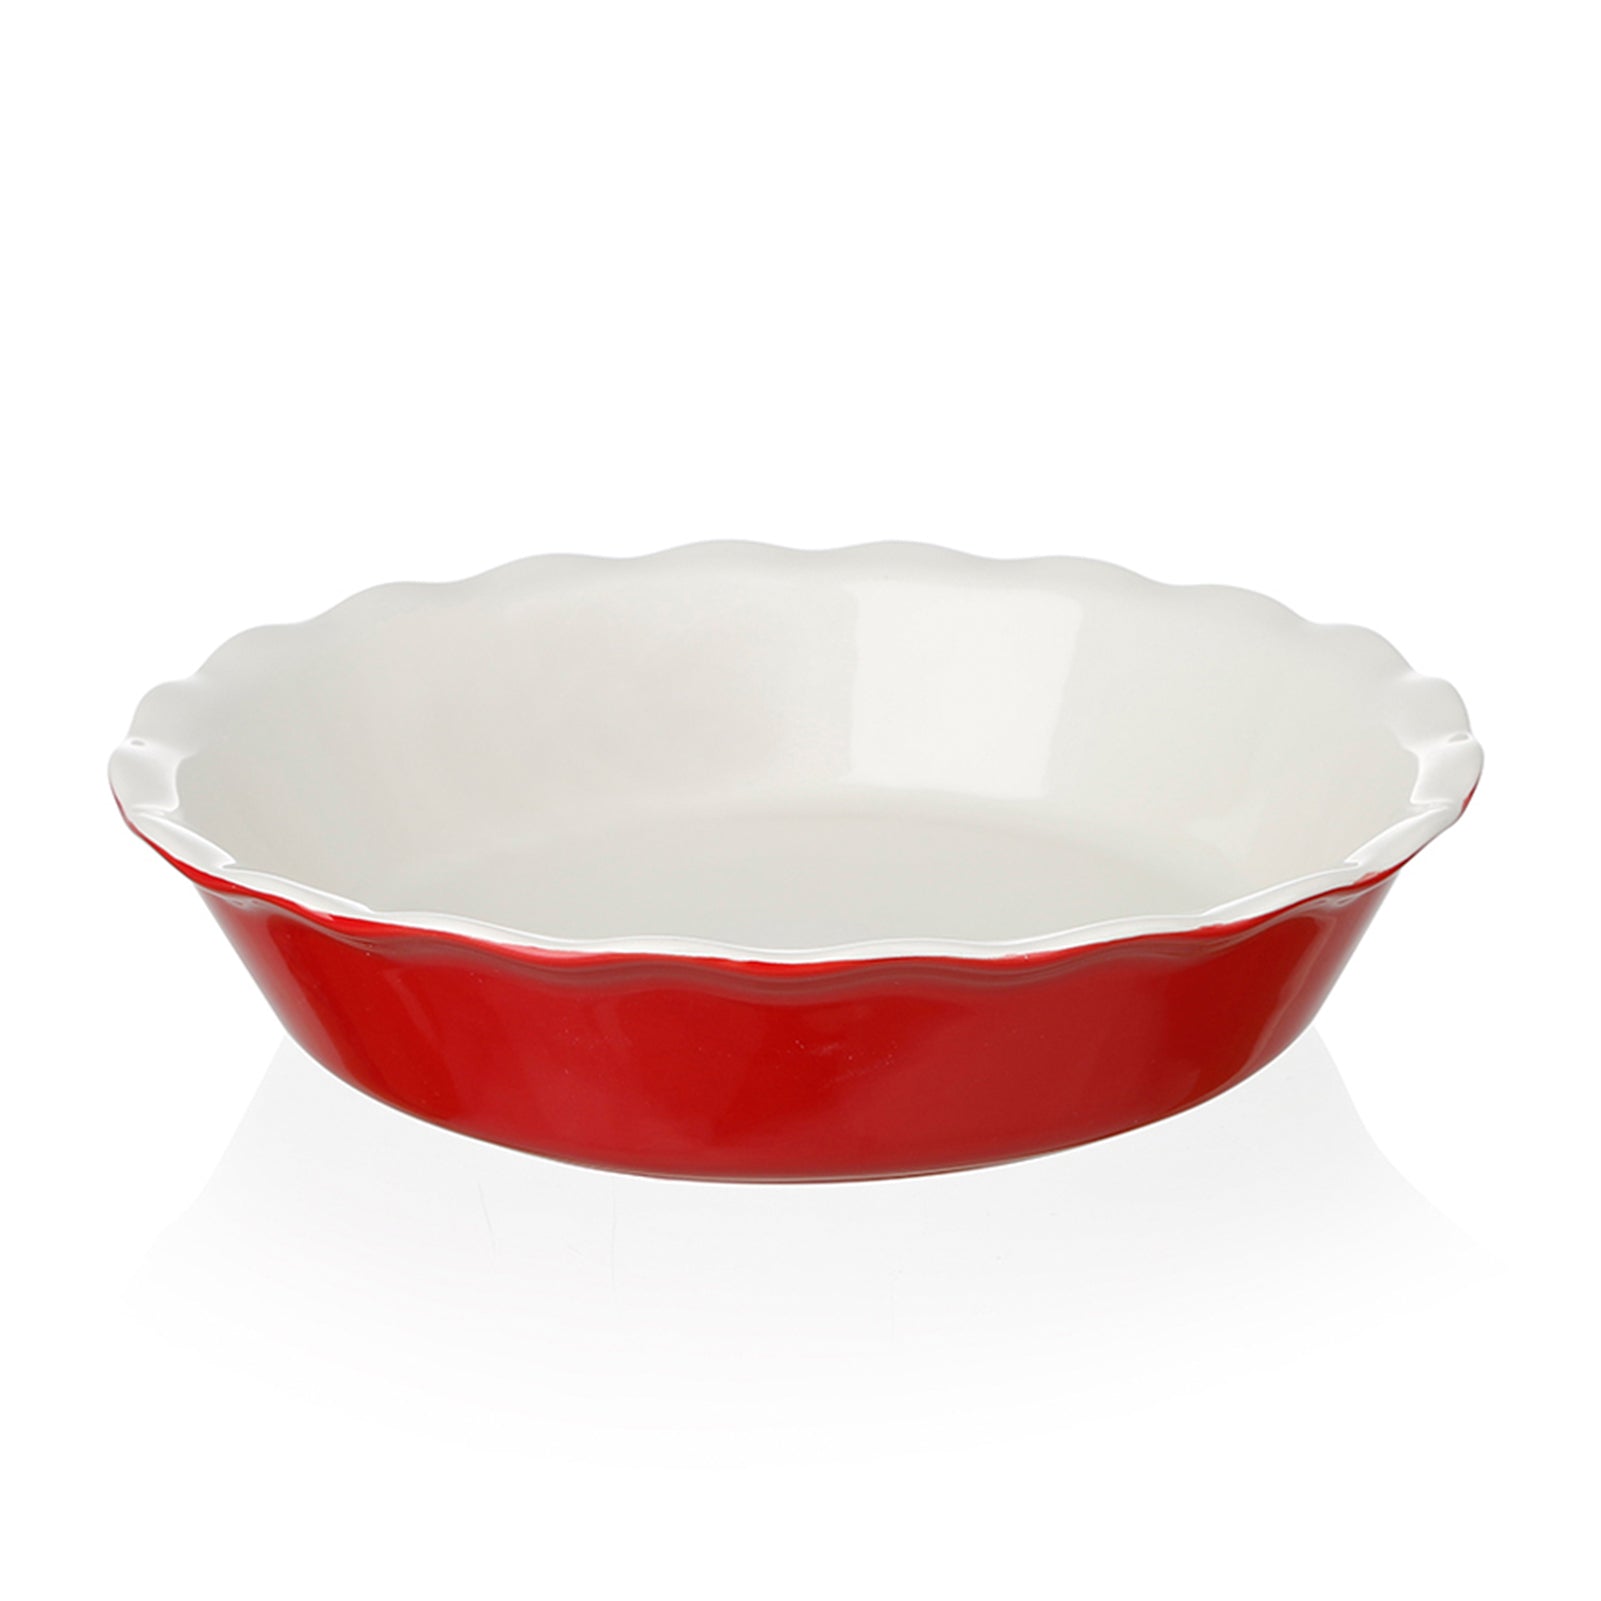 SWEEJAR Ceramic Pie Pan for Baking, 10 Inches Round Baking Dish for Qu ...